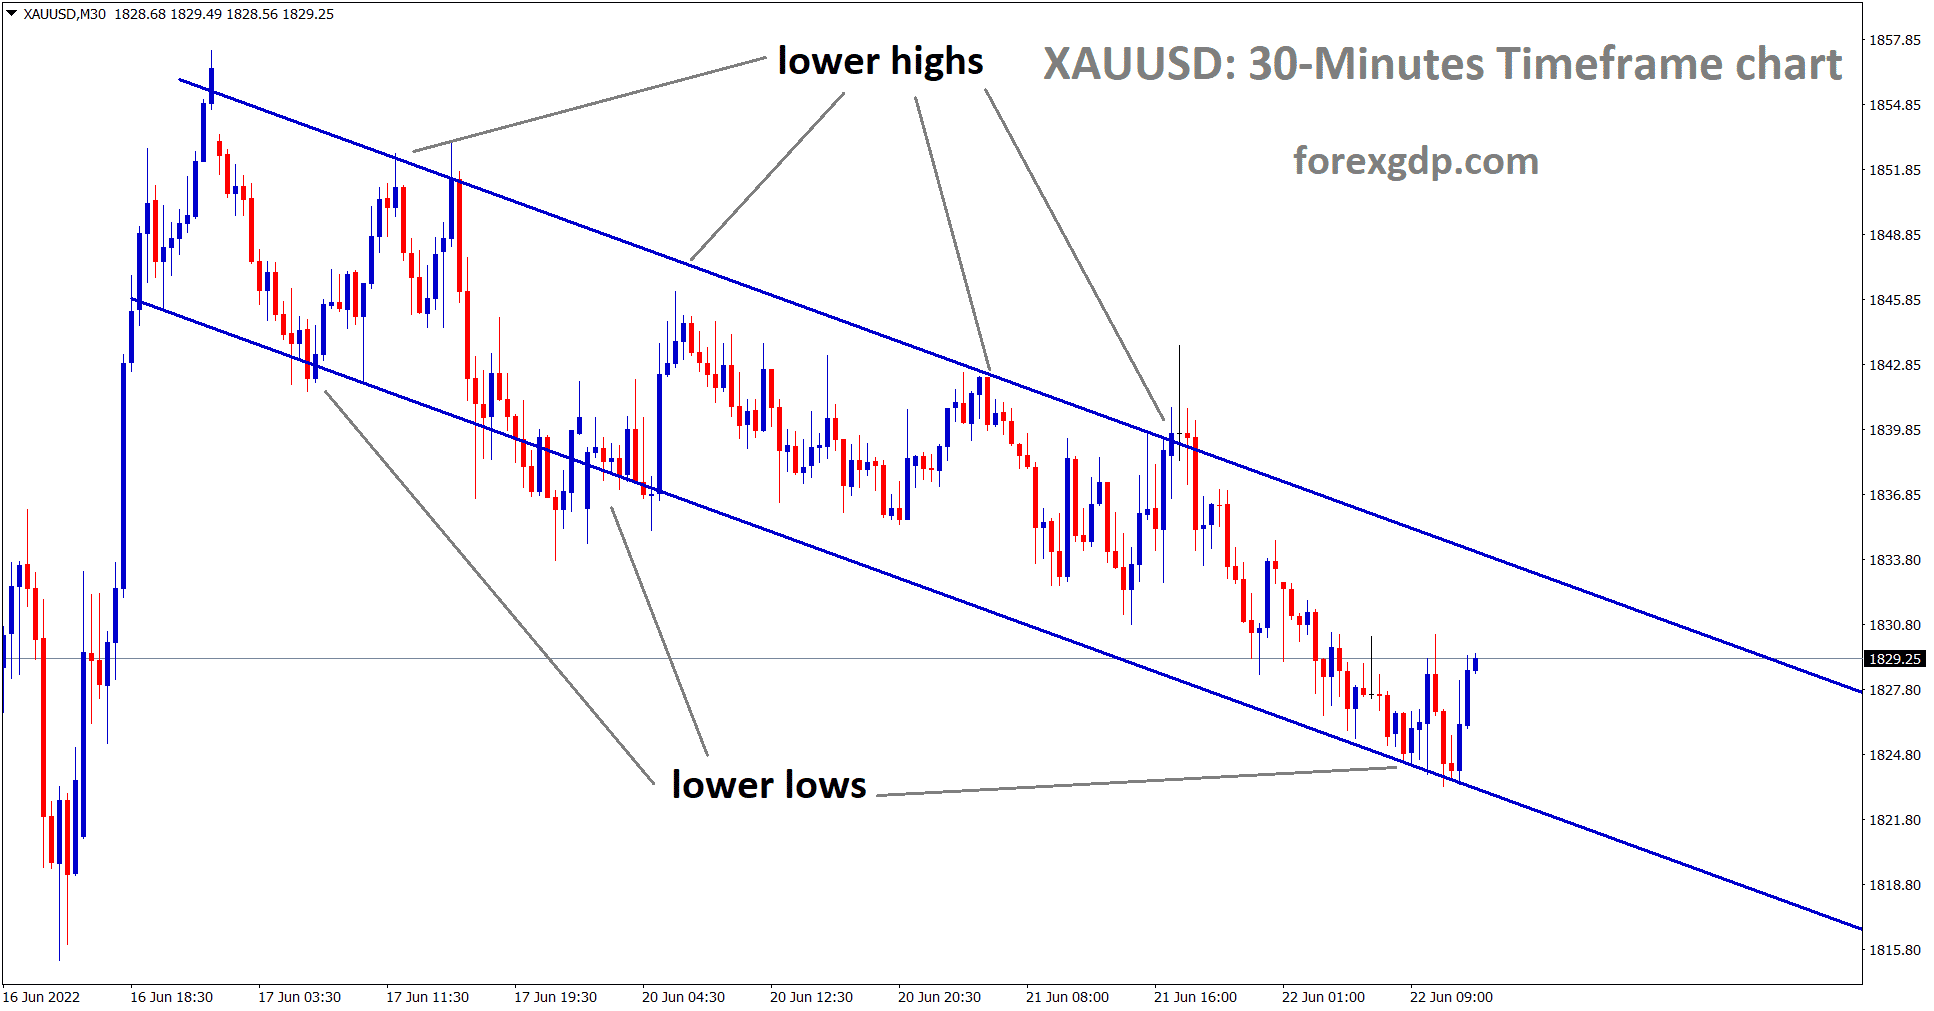 XAUUSD is moving in a descending channel and the market rebounded from the lower low area of the channel